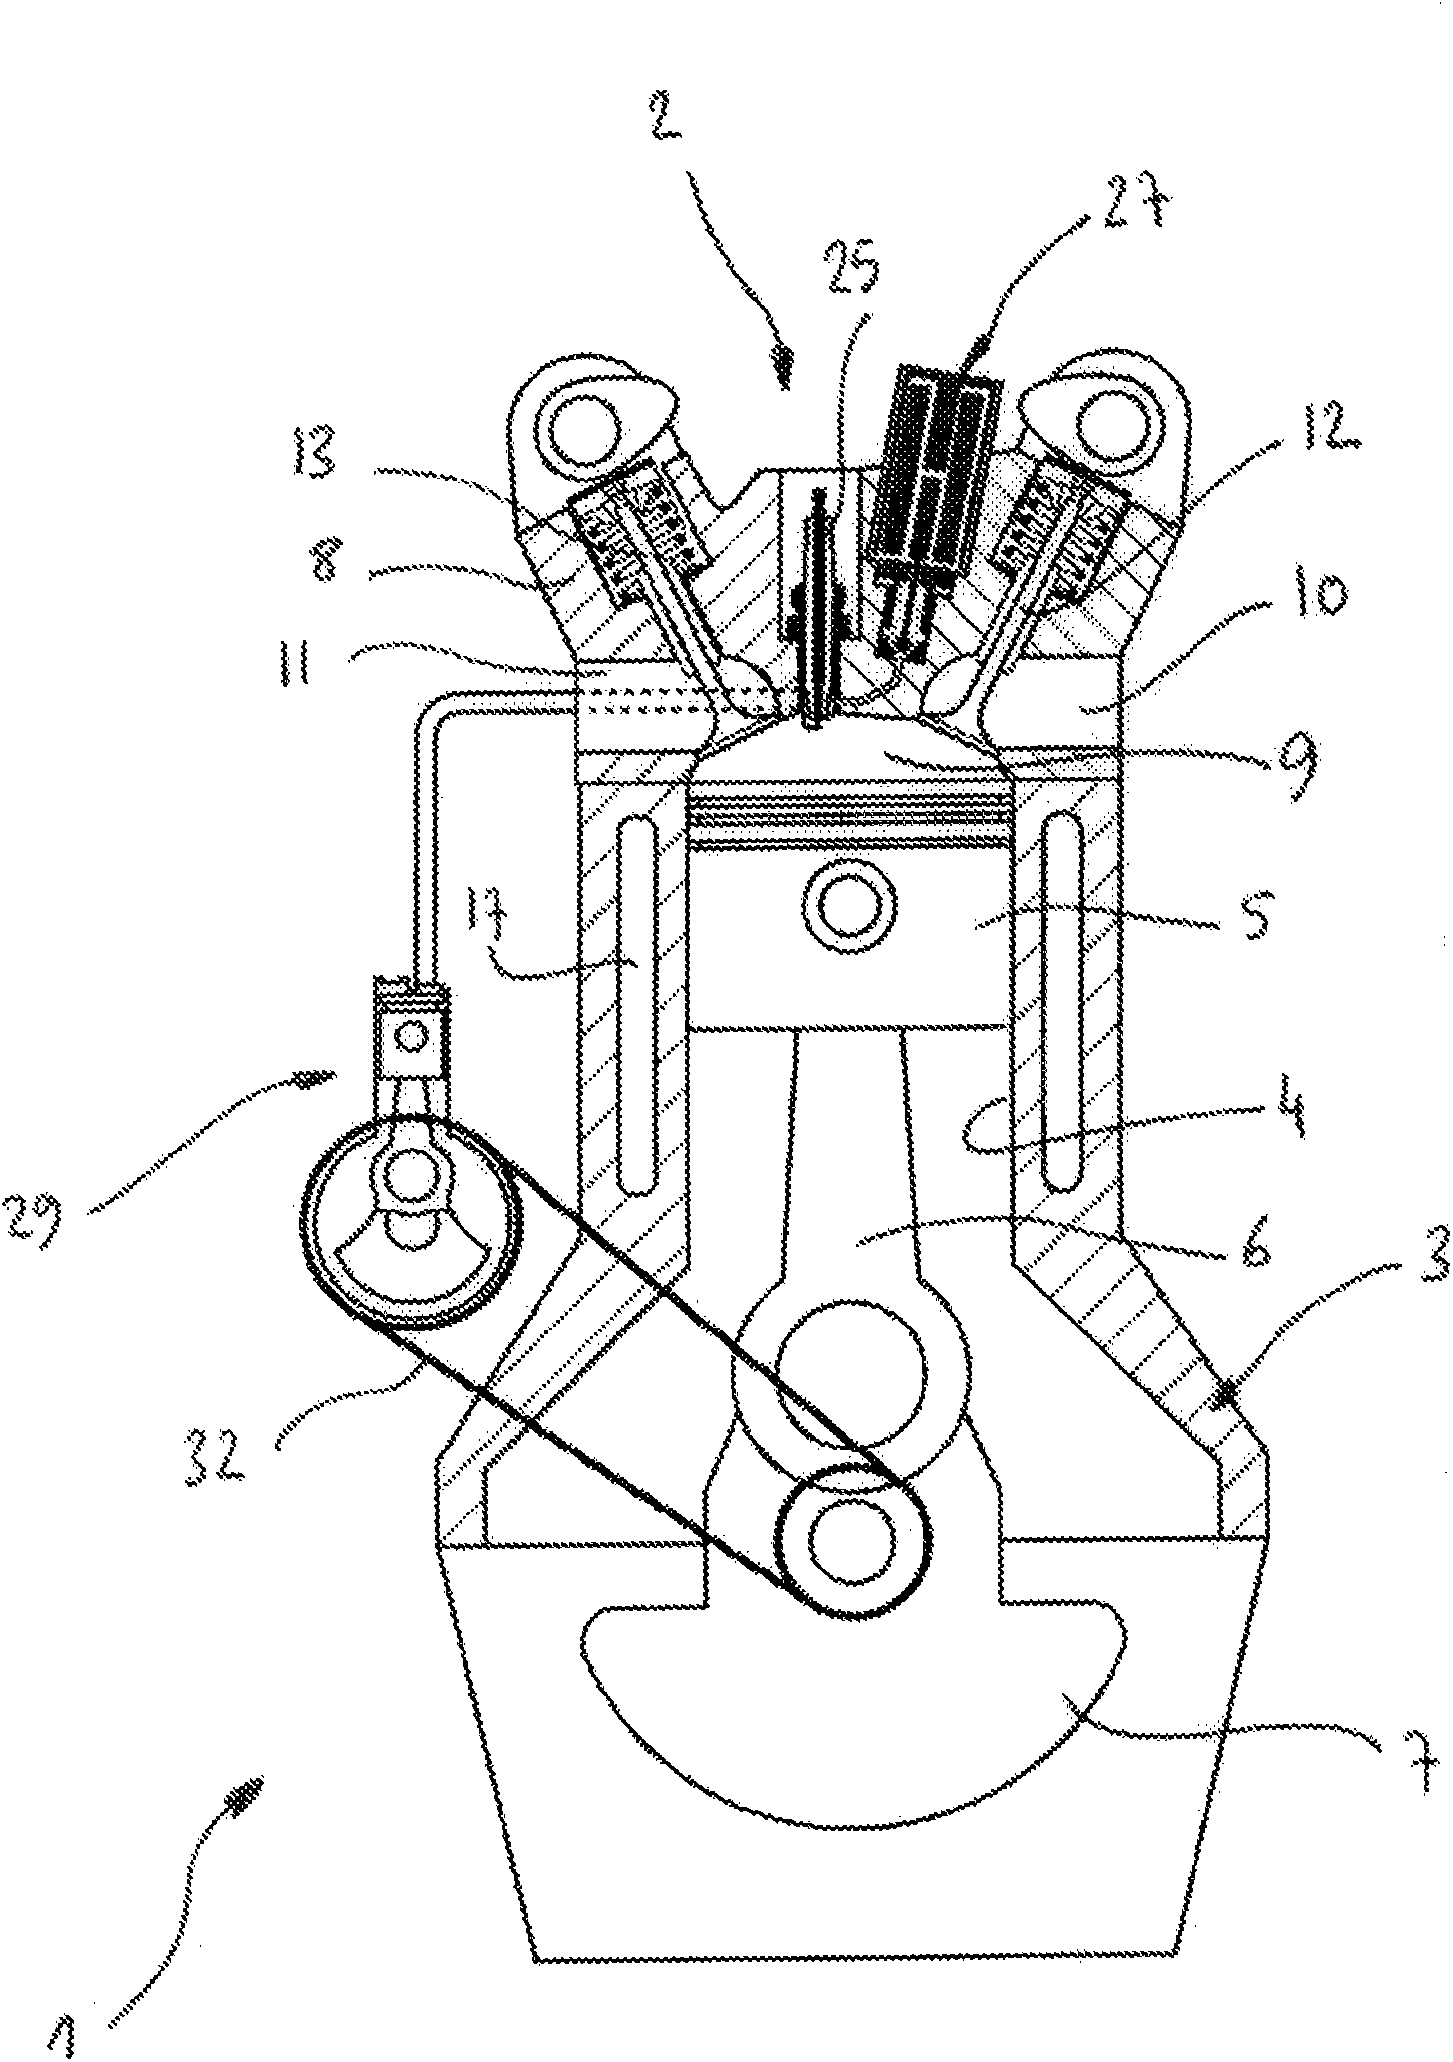 High-pressure stratification and spark ignition device for an internal combustion engine